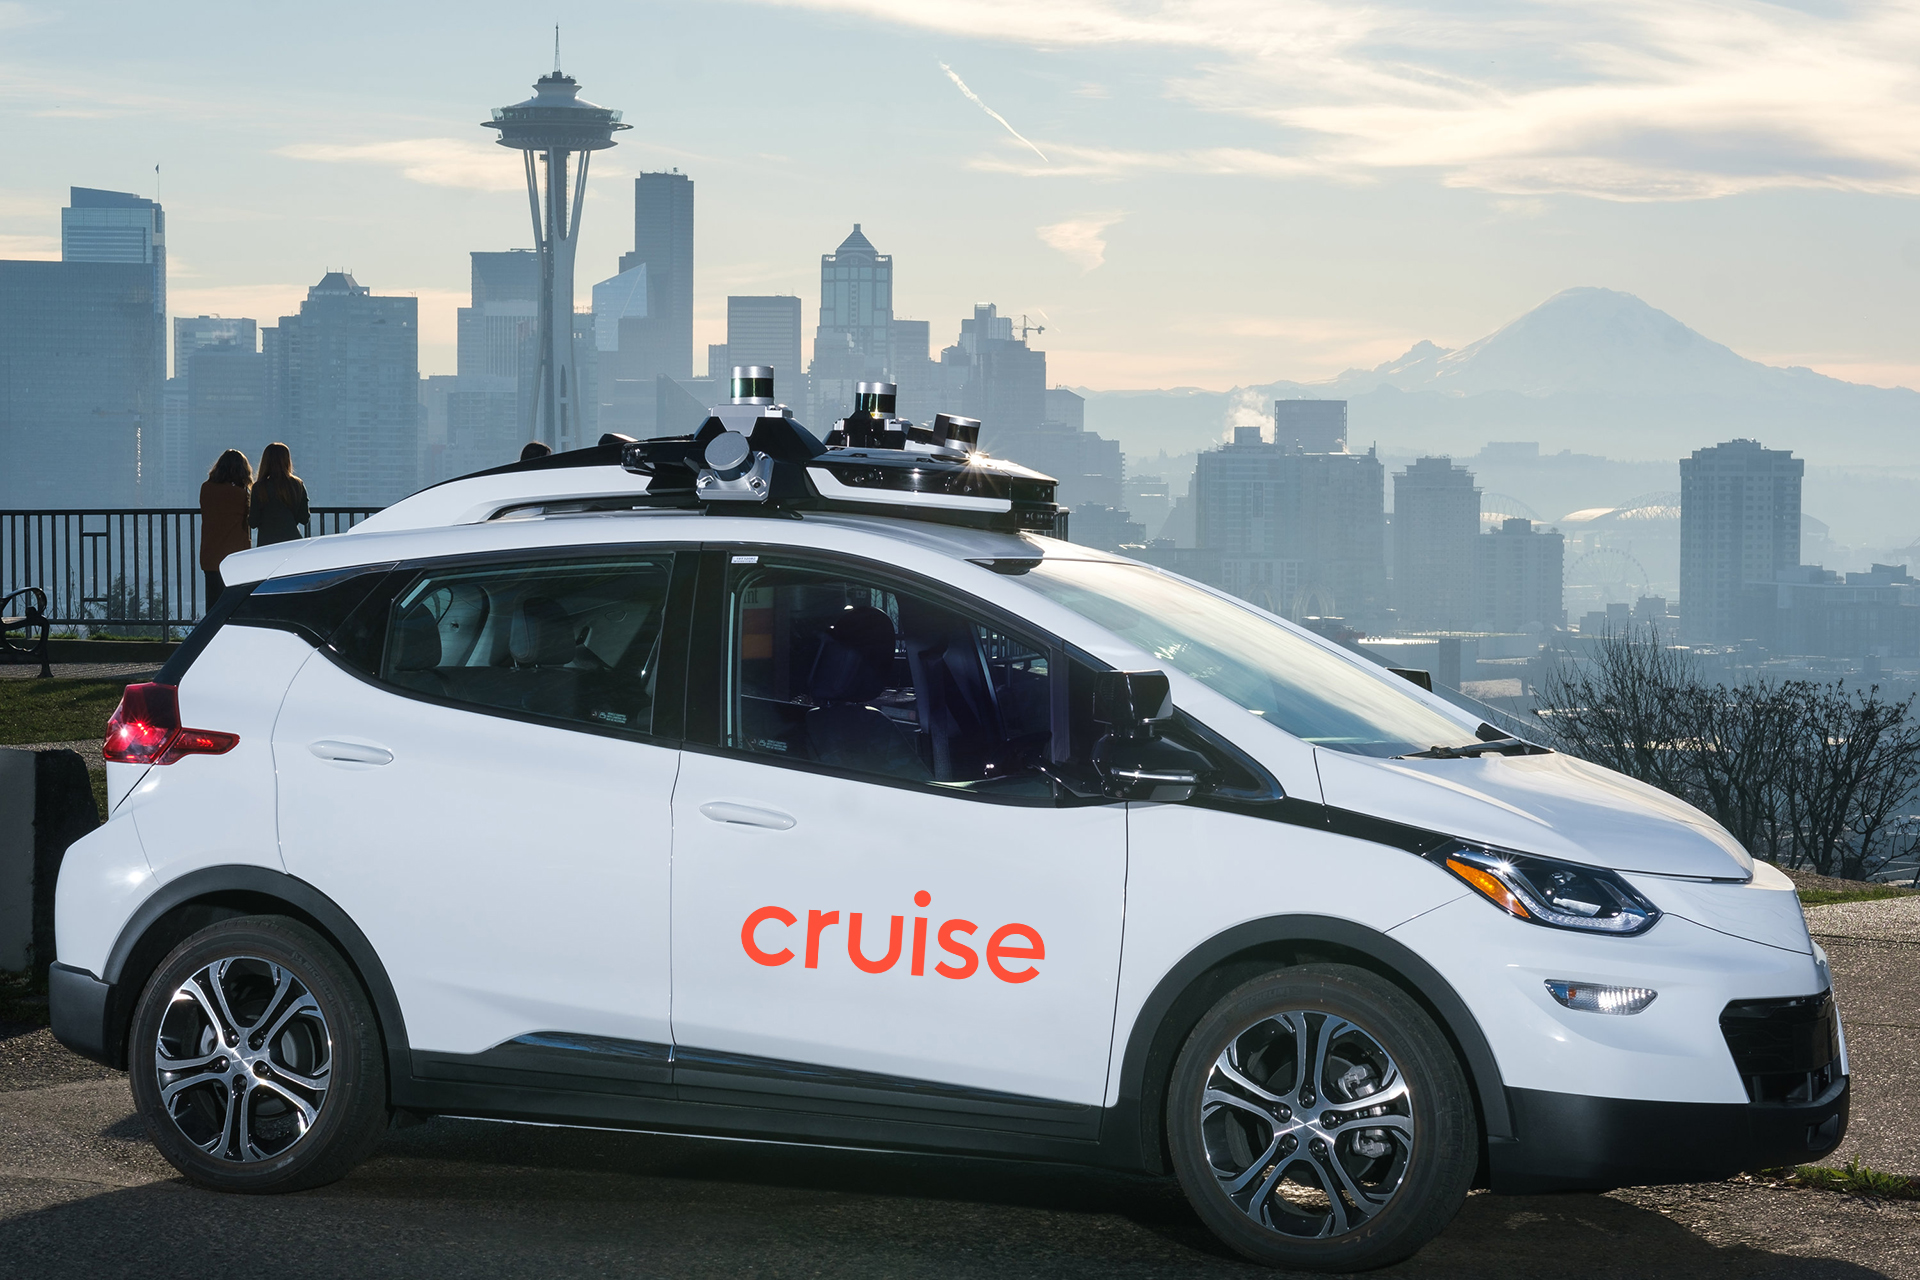 Cruise LLC Chevy Bolt. GM Cruise uses a fleet of Chevy Bolts for its robotaxi autonomous vehicles